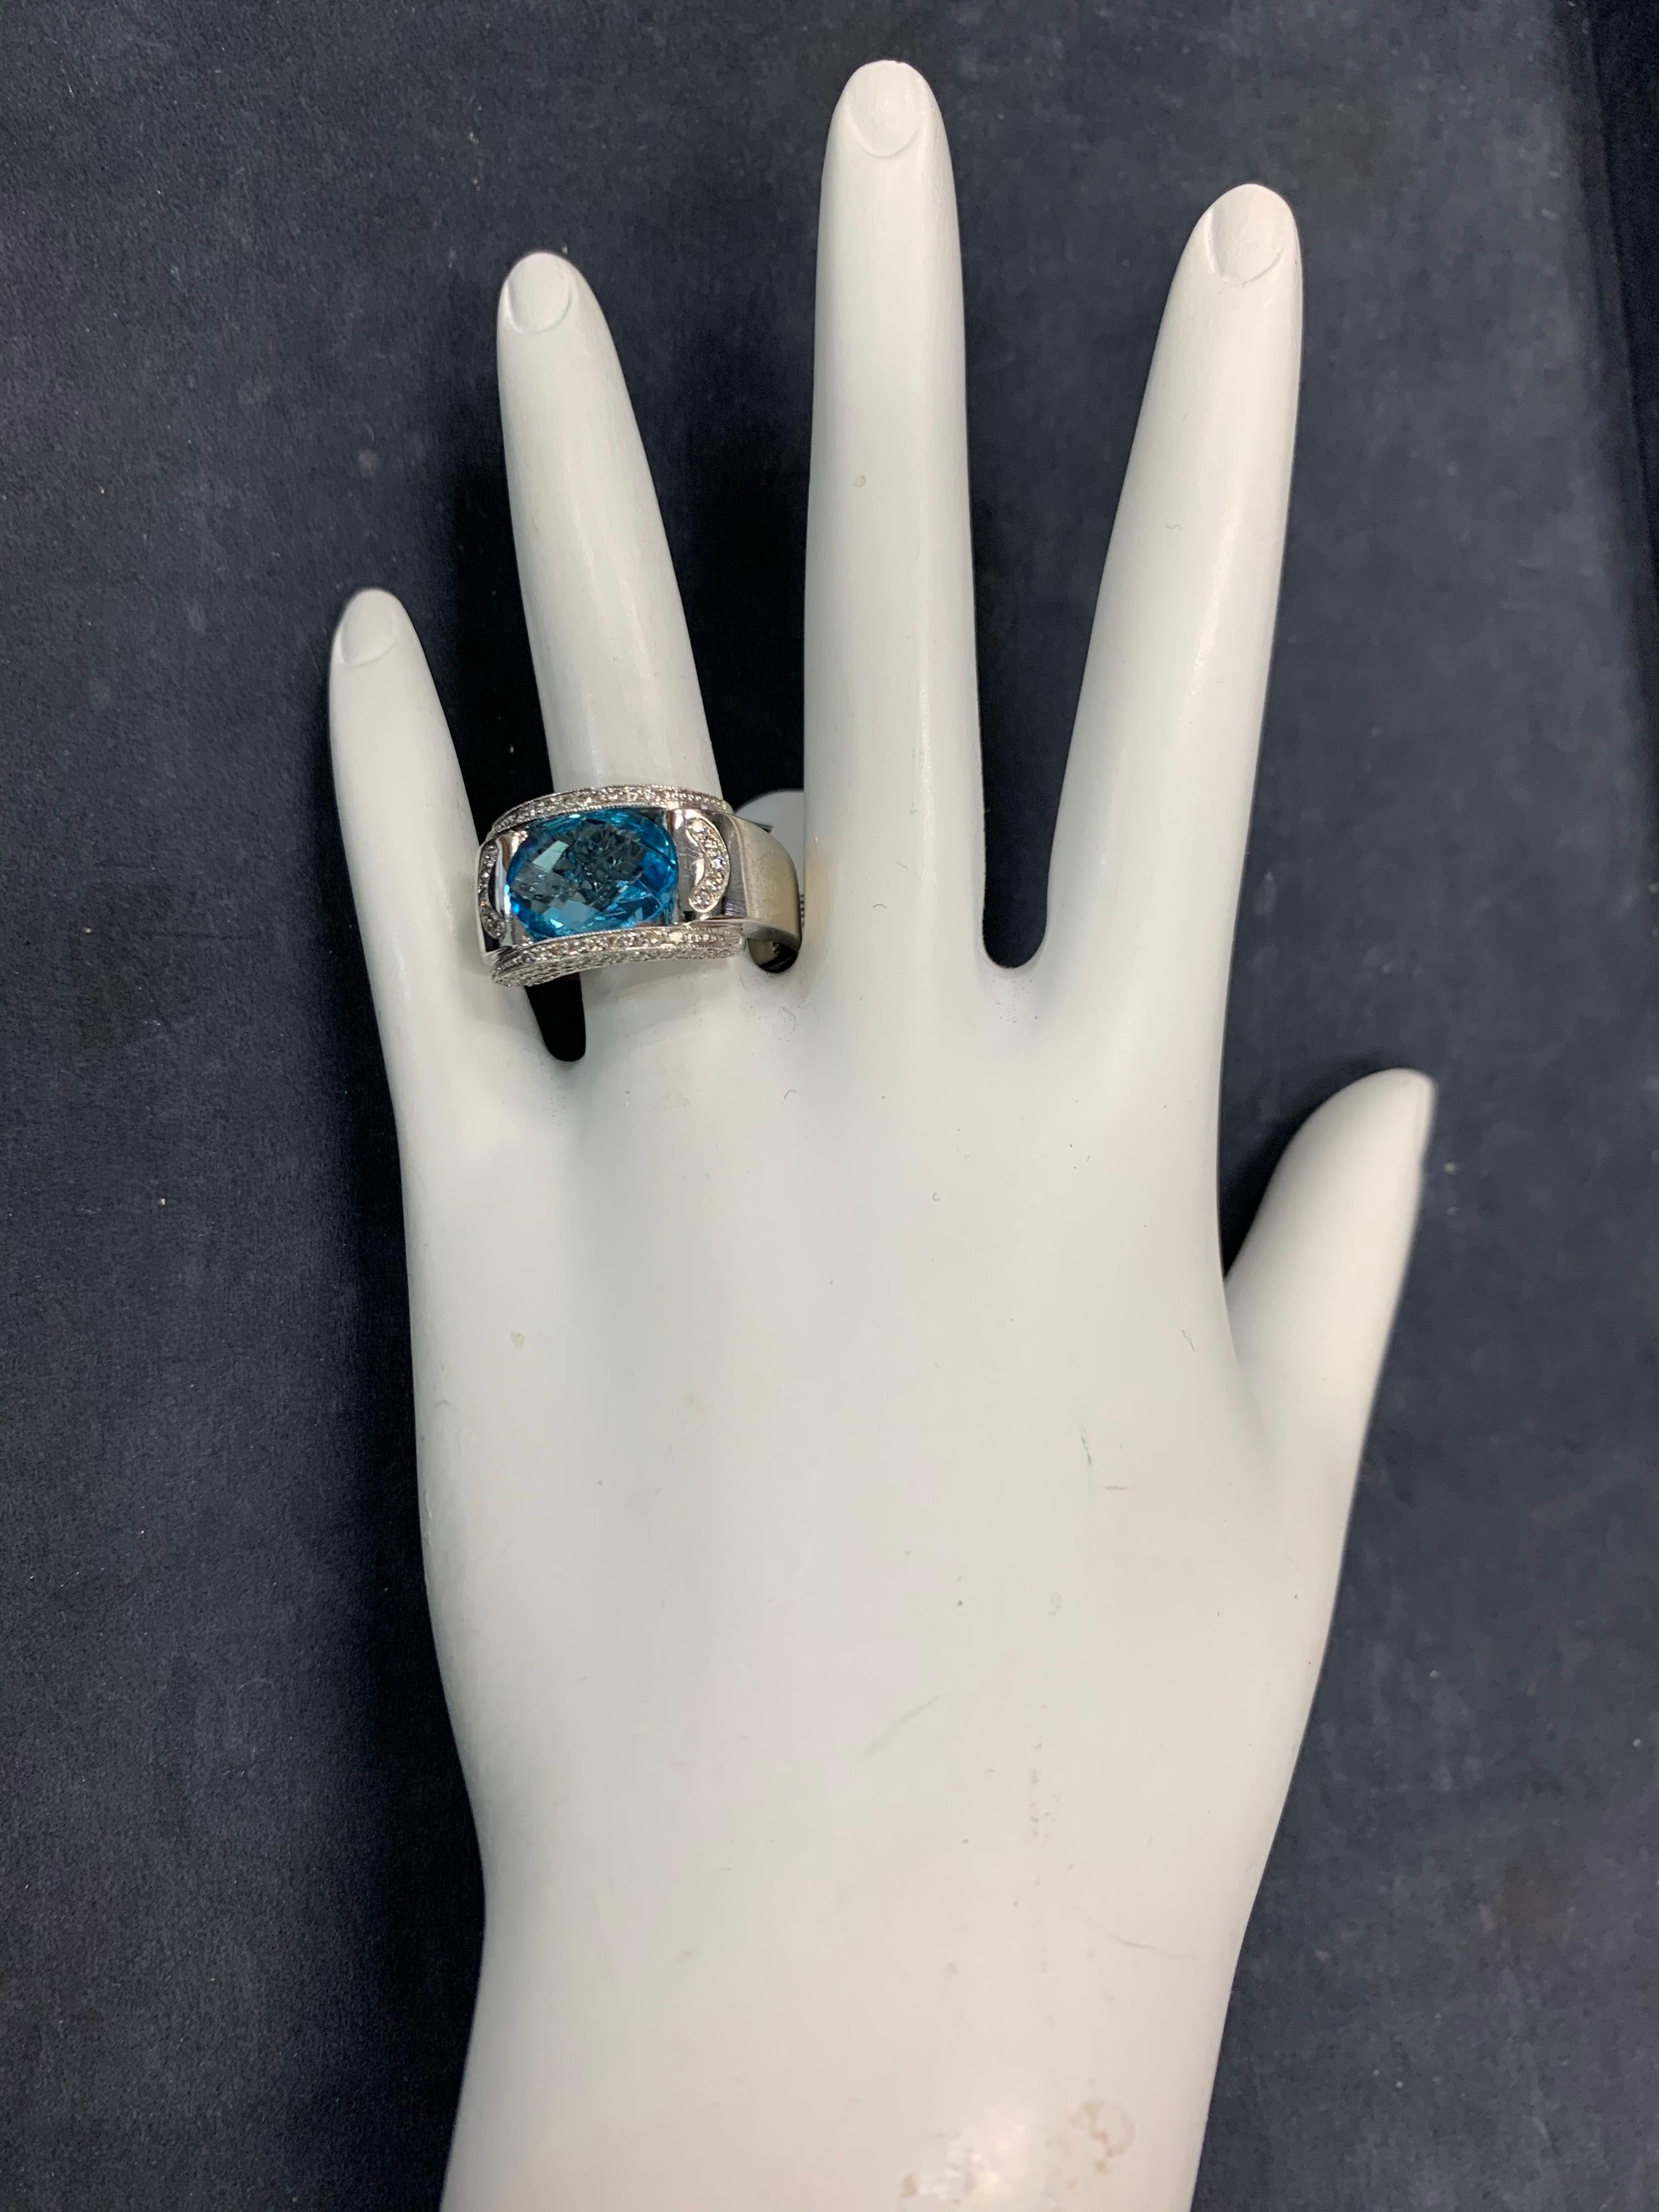 Modern 14k White Gold 5.43 Carat Natural Oval Blue Topaz & Colorless Diamond Cocktail Ring. 

The centerstone is a 4.90 carat oval cut topaz and the natural colorless diamonds weigh 0.53 carats.

The ring weighs 11.2 grams and is a size 7.5.